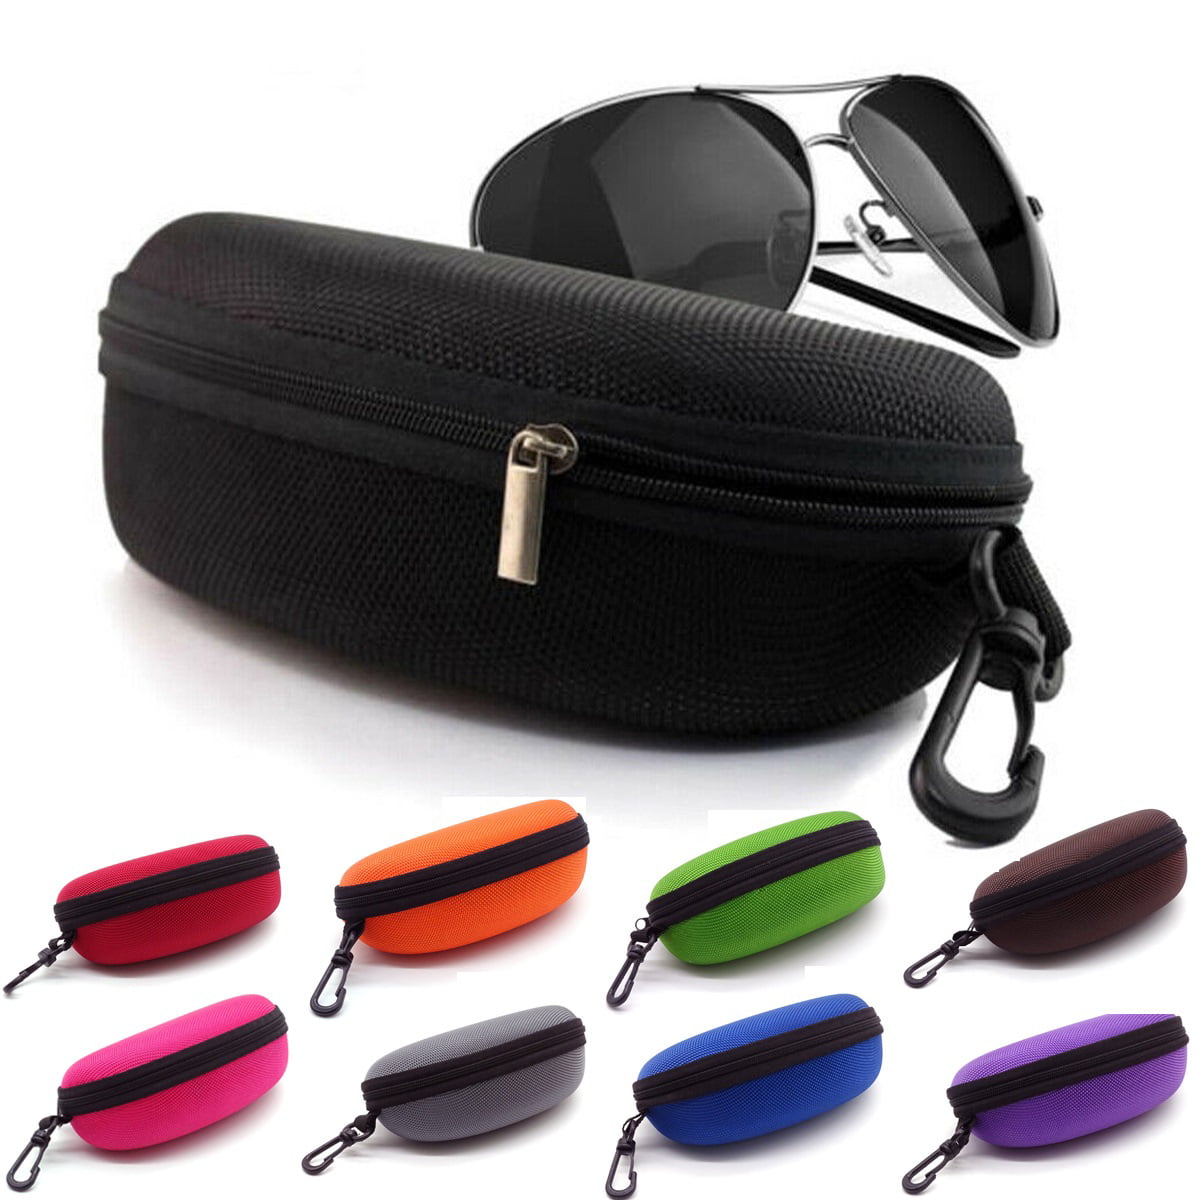 Protector Storage Box Case Cover Pouch For Eyeglasses Sunglasses Glasses 